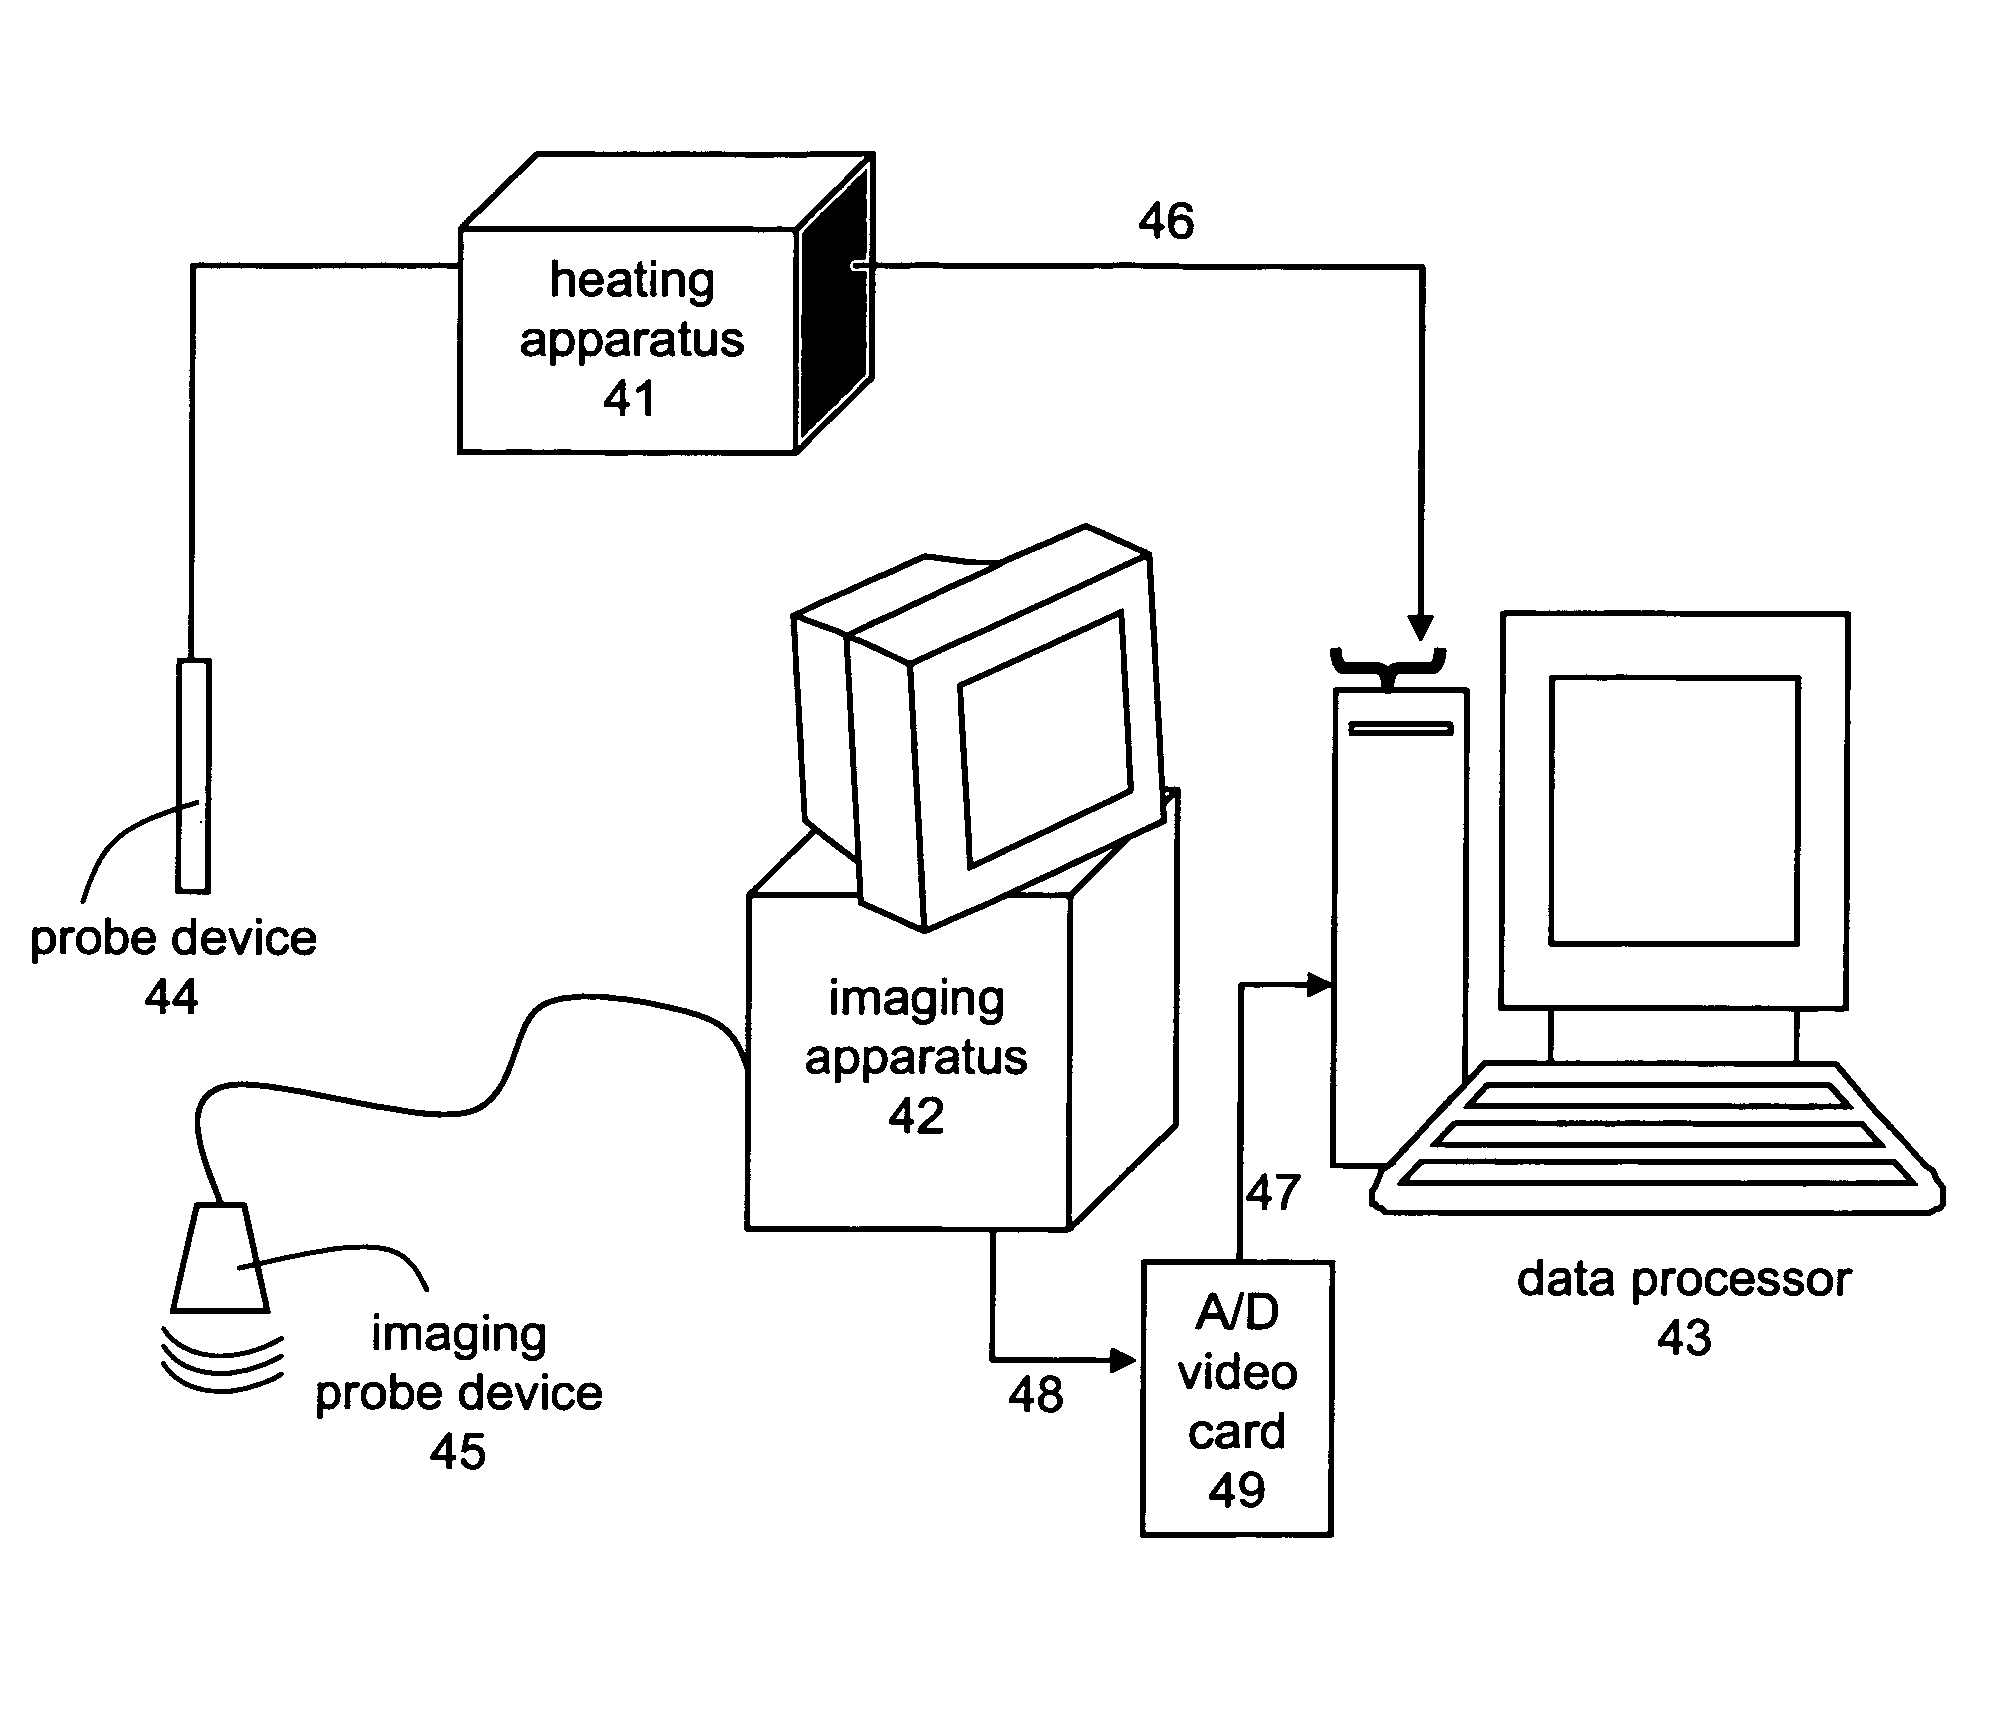 Method and system for monitoring ablation of tissues